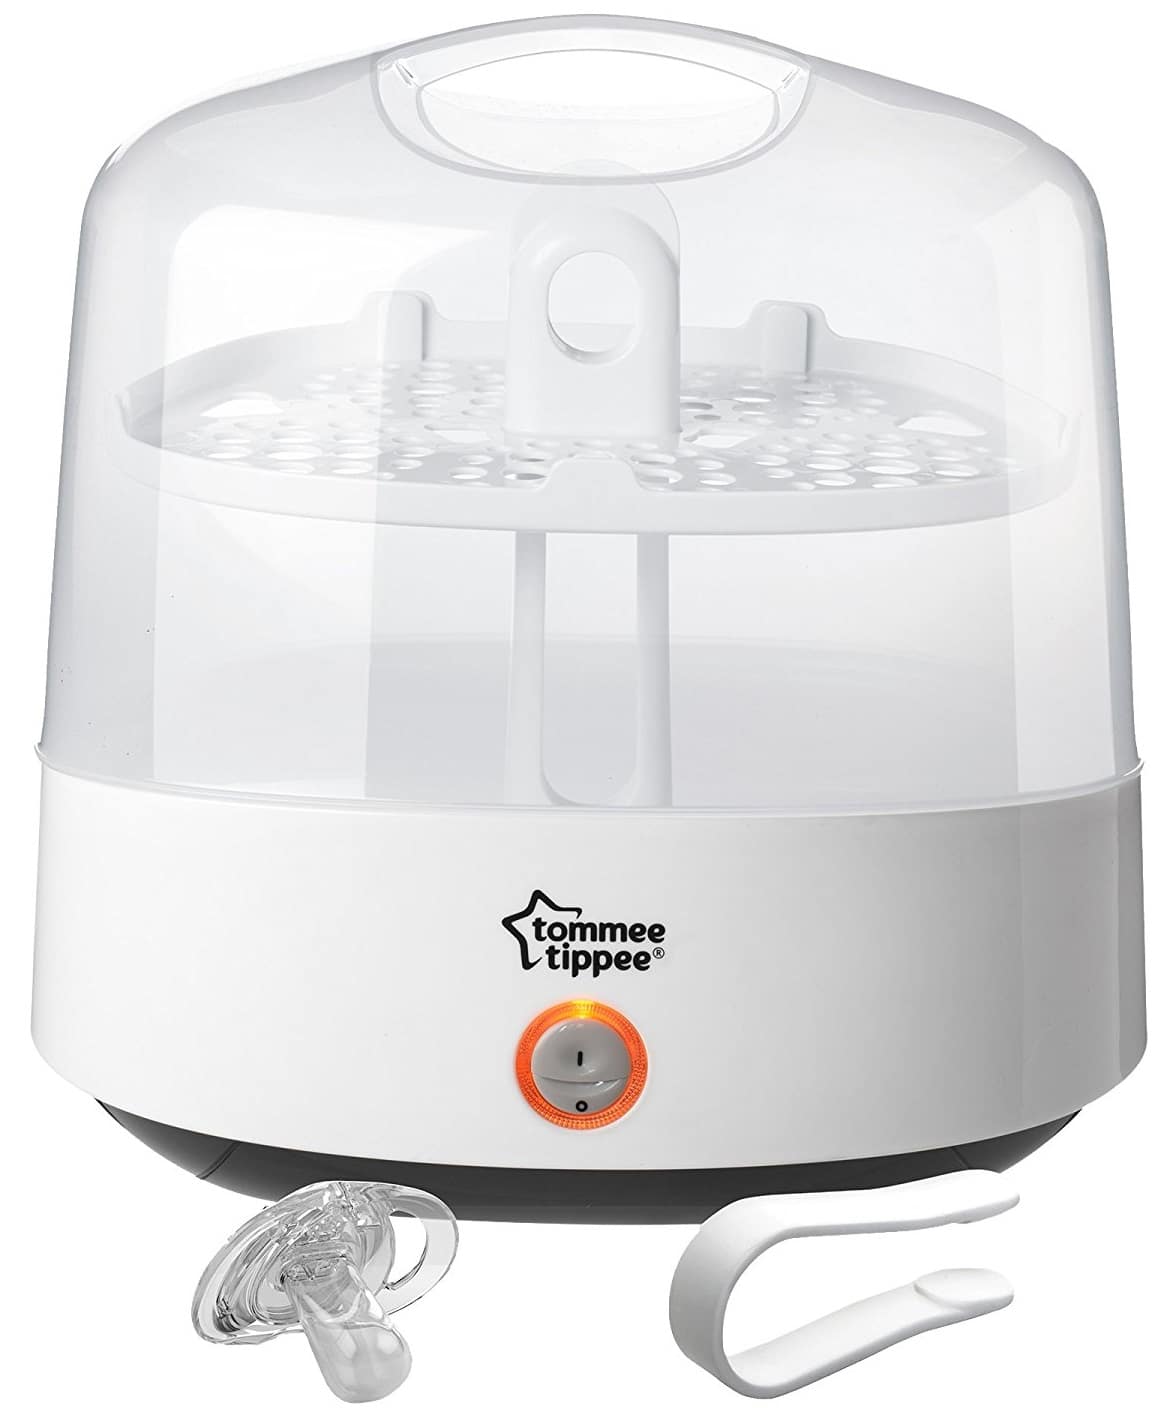 Tommee Tippee Electric Steam Baby Bottle Sterilizer